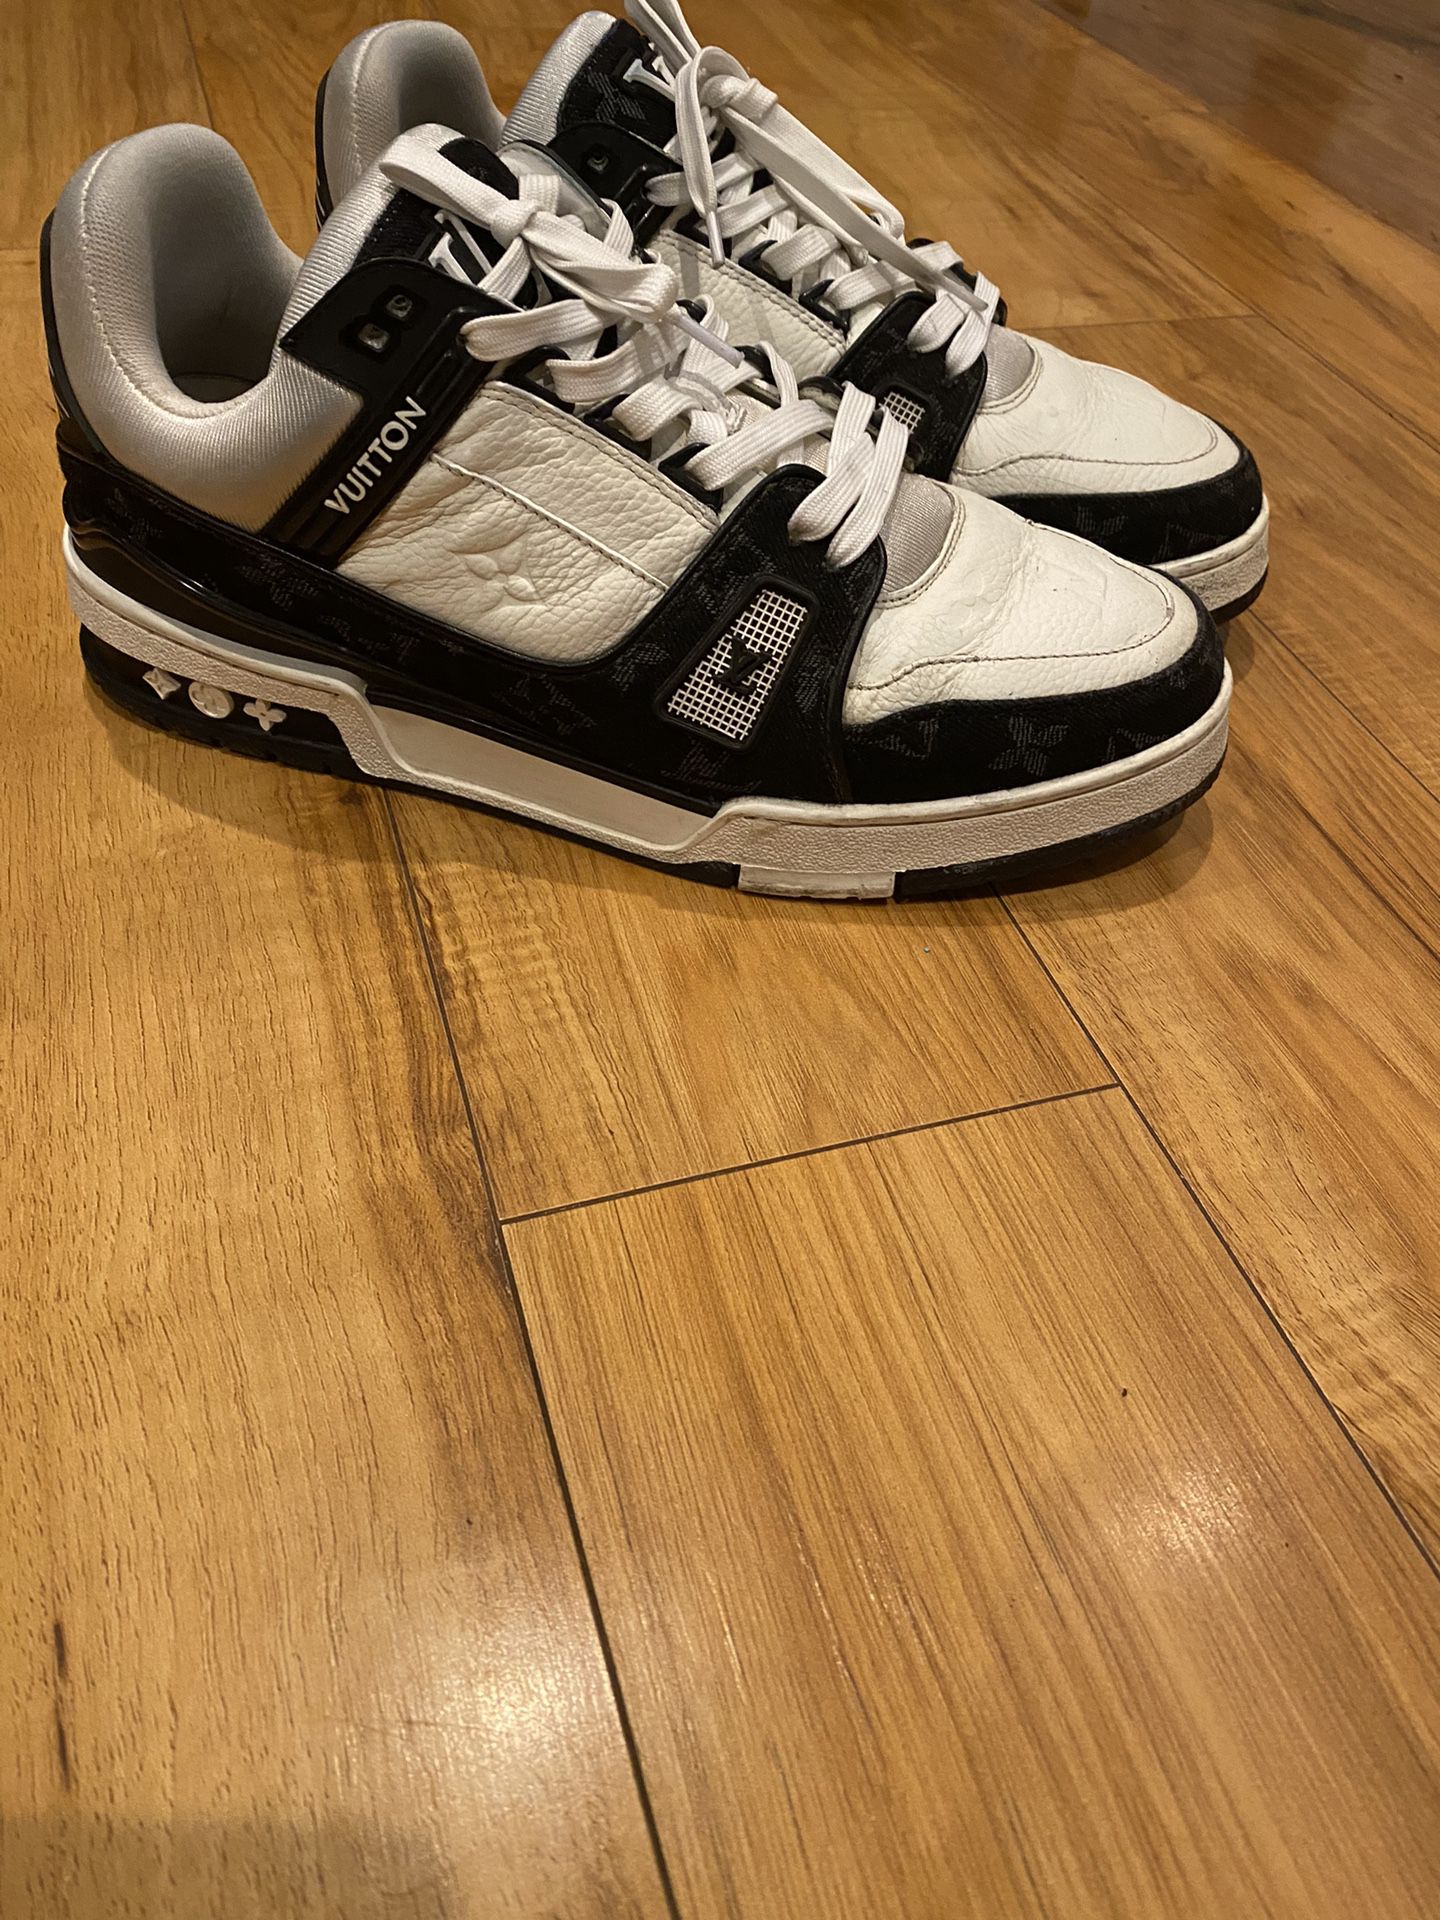 Louis Vuitton Trainer Sneaker For Men Size 8 for Sale in Los